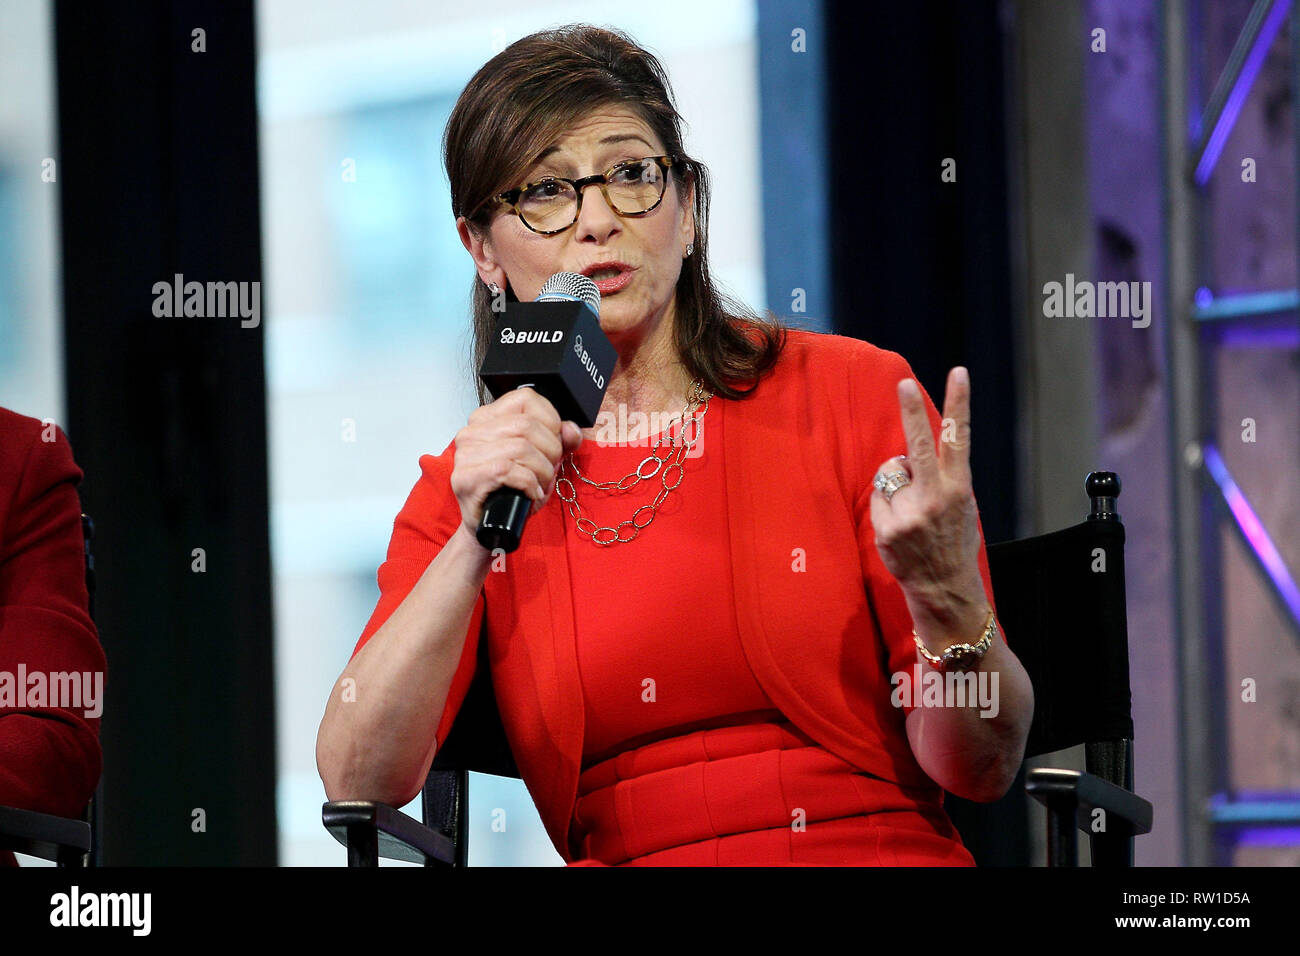 New York, USA. 05 Apr, 2016. Chairman of CBS Entertainment, Nina Tassler at The Tuesday, Apr 5, 2016 AOL BUILD Series discussing 'What I Told My Daughter: Lessons From Leaders On Raising The Next Generation Of Empowered Women' at AOL Studios In New York in New York, USA. Credit: Steve Mack/S.D. Mack Pictures/Alamy Stock Photo